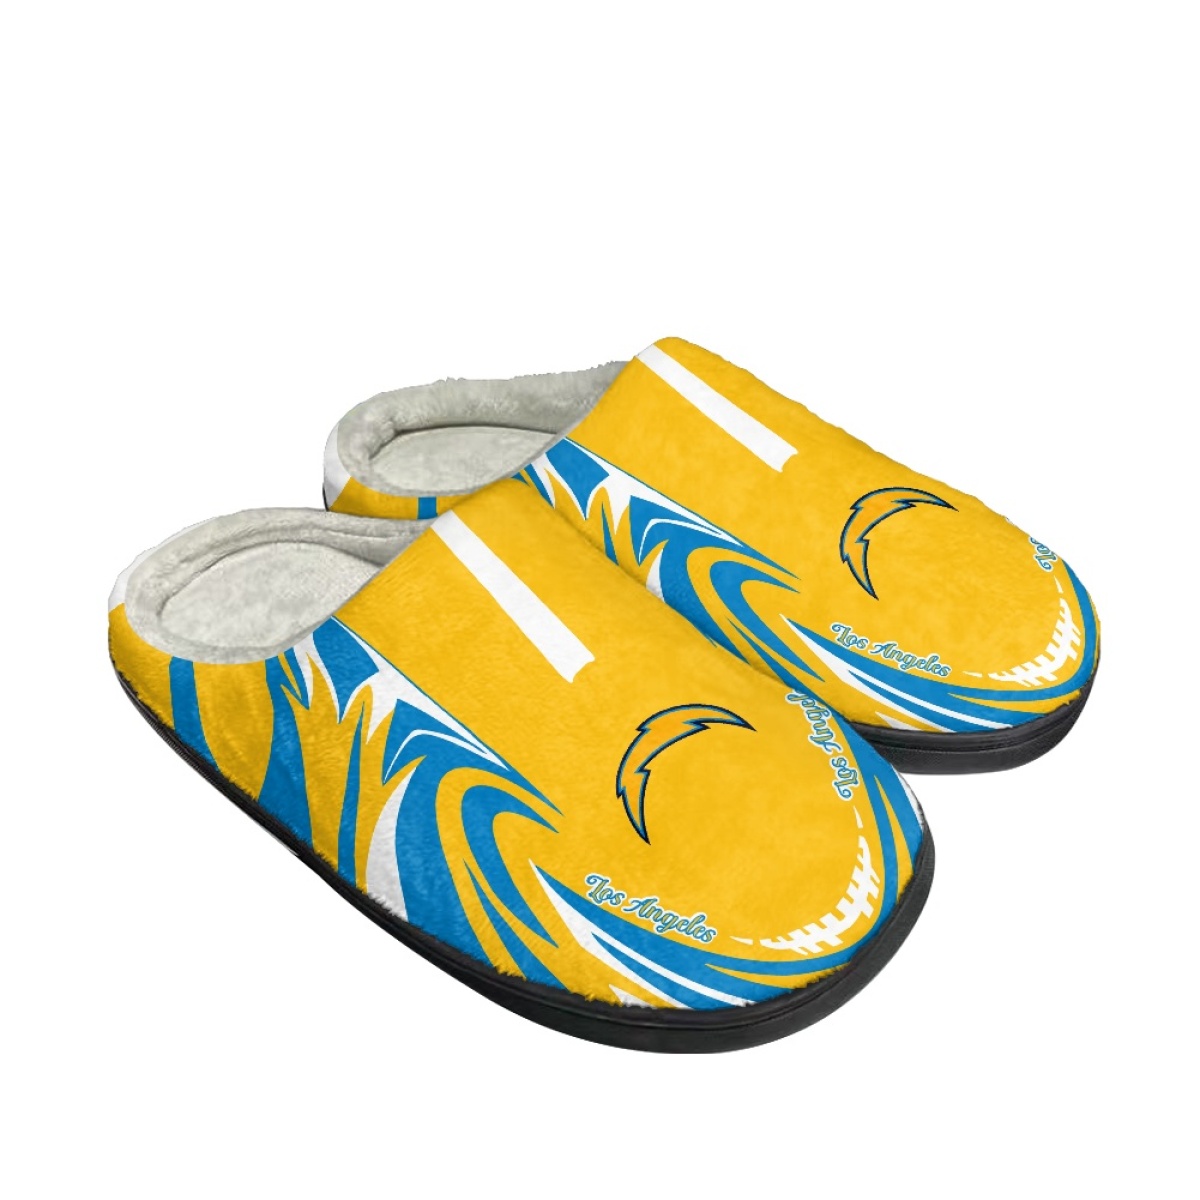 Men's Los Angeles Chargers Slippers/Shoes 004